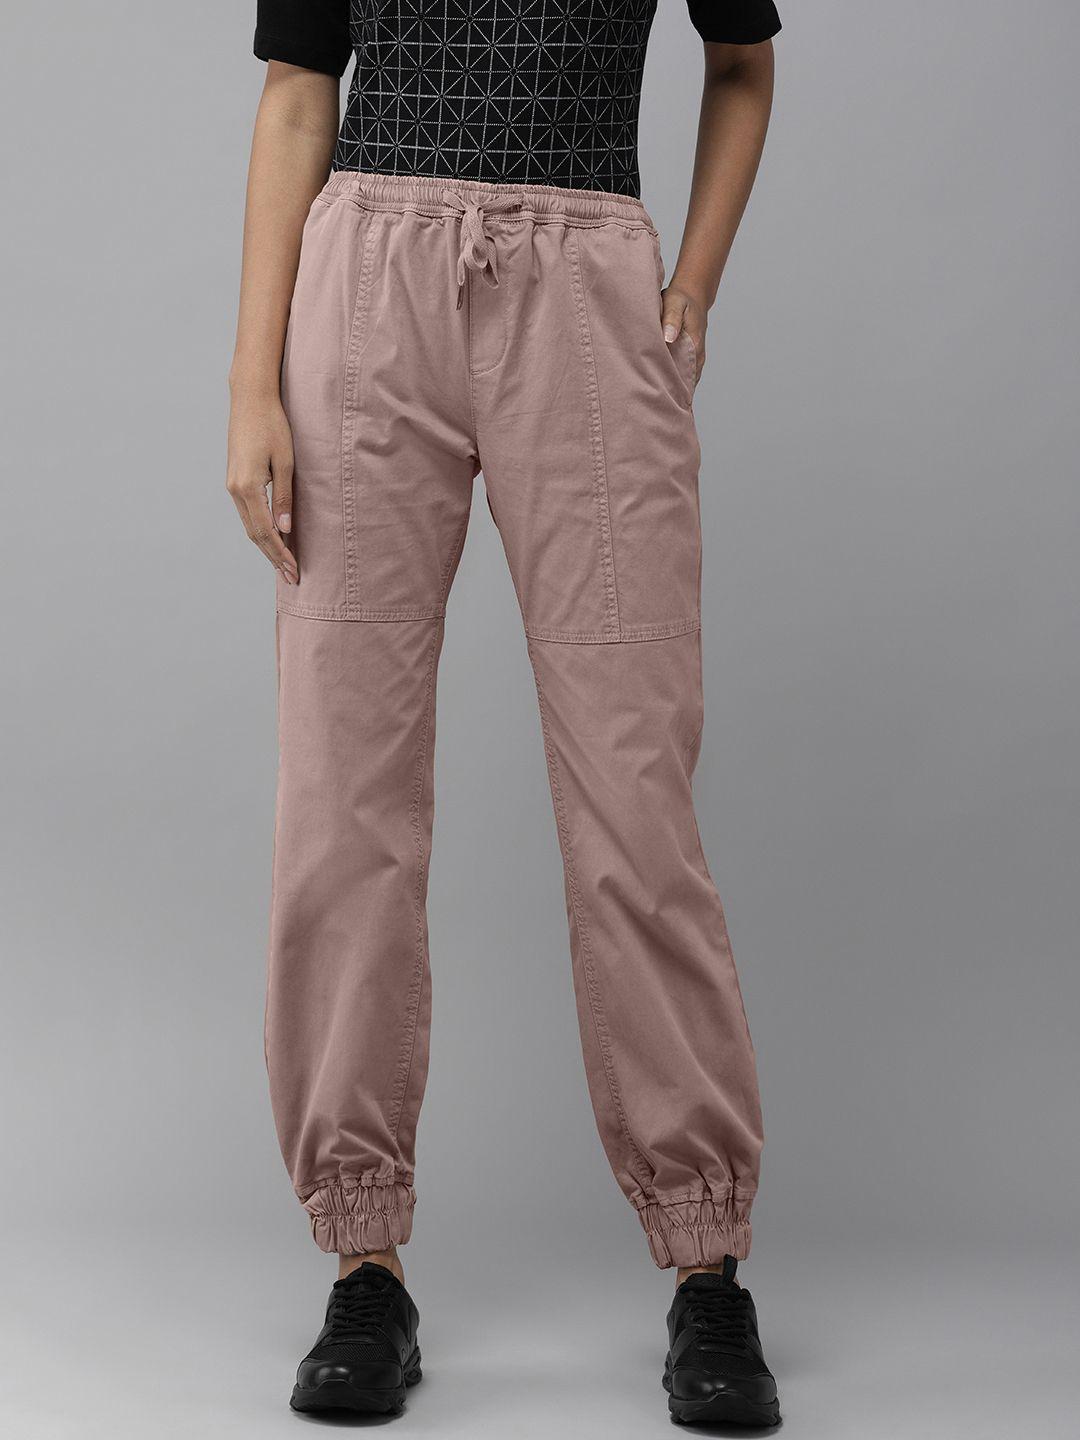 the roadster lifestyle co women rust pink high-rise pleated joggers trousers